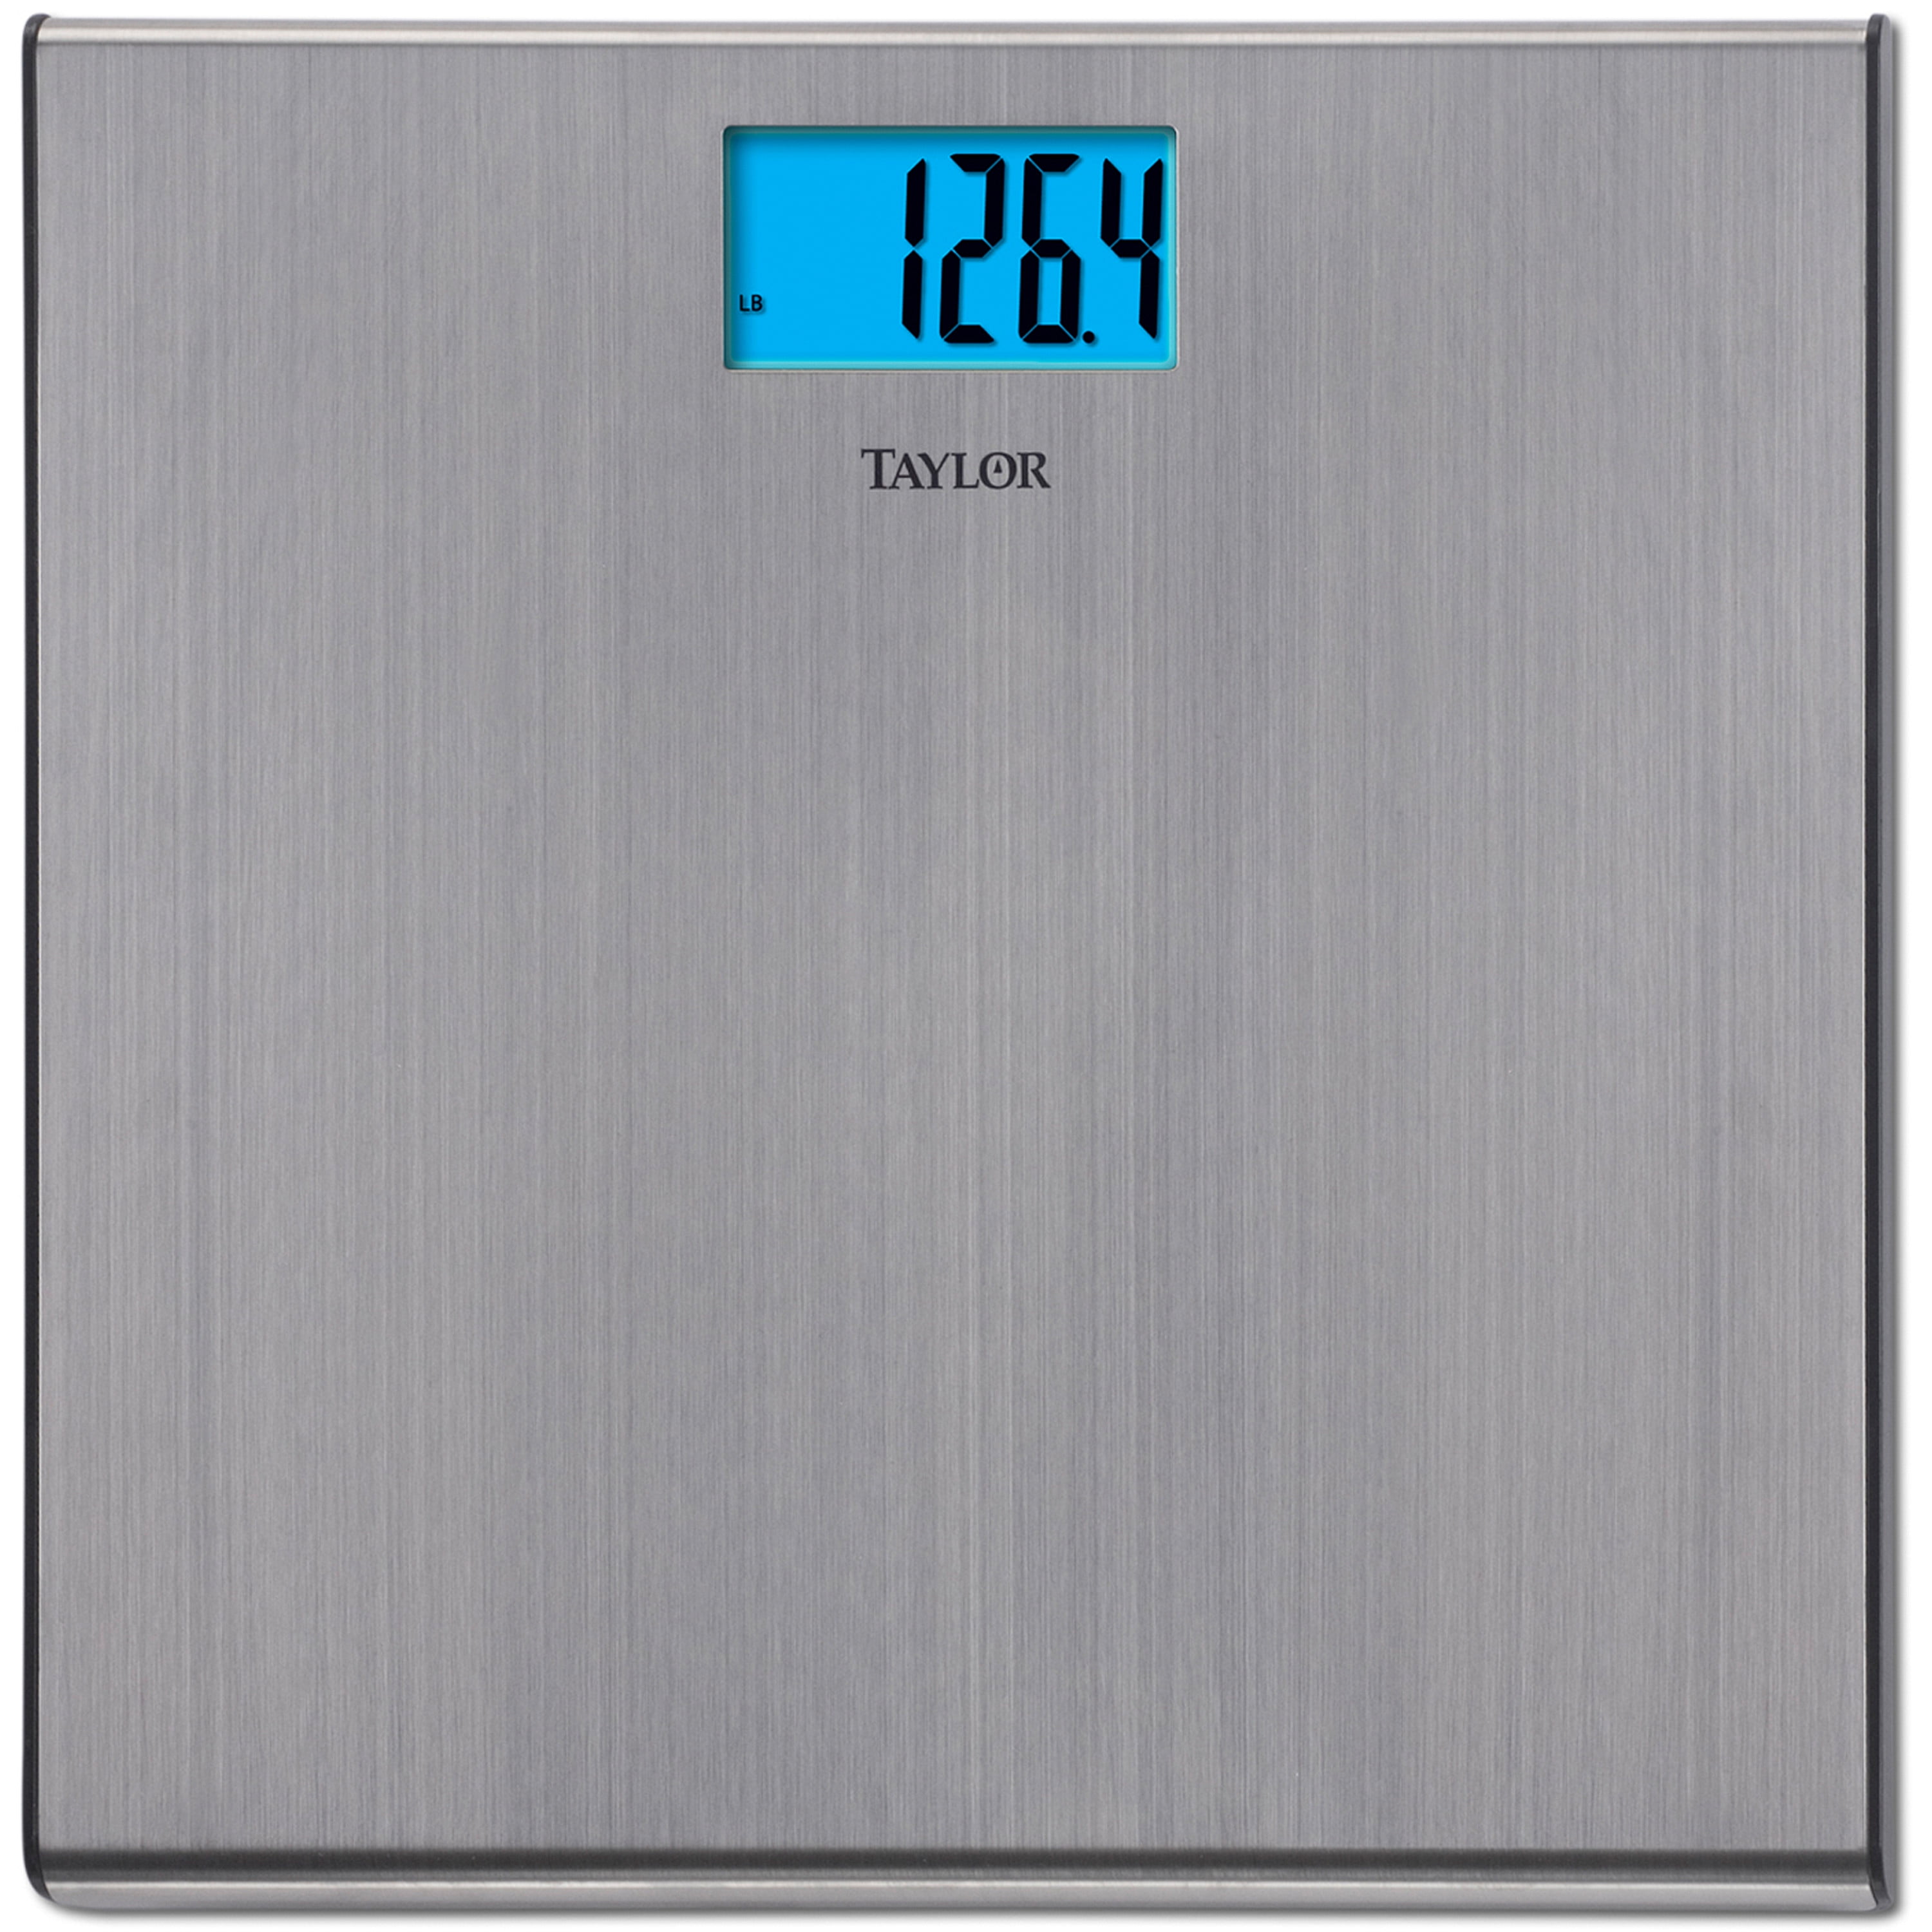 Taylor® Precision Products 7403 Brushed S/S Digital Bathroom Scale